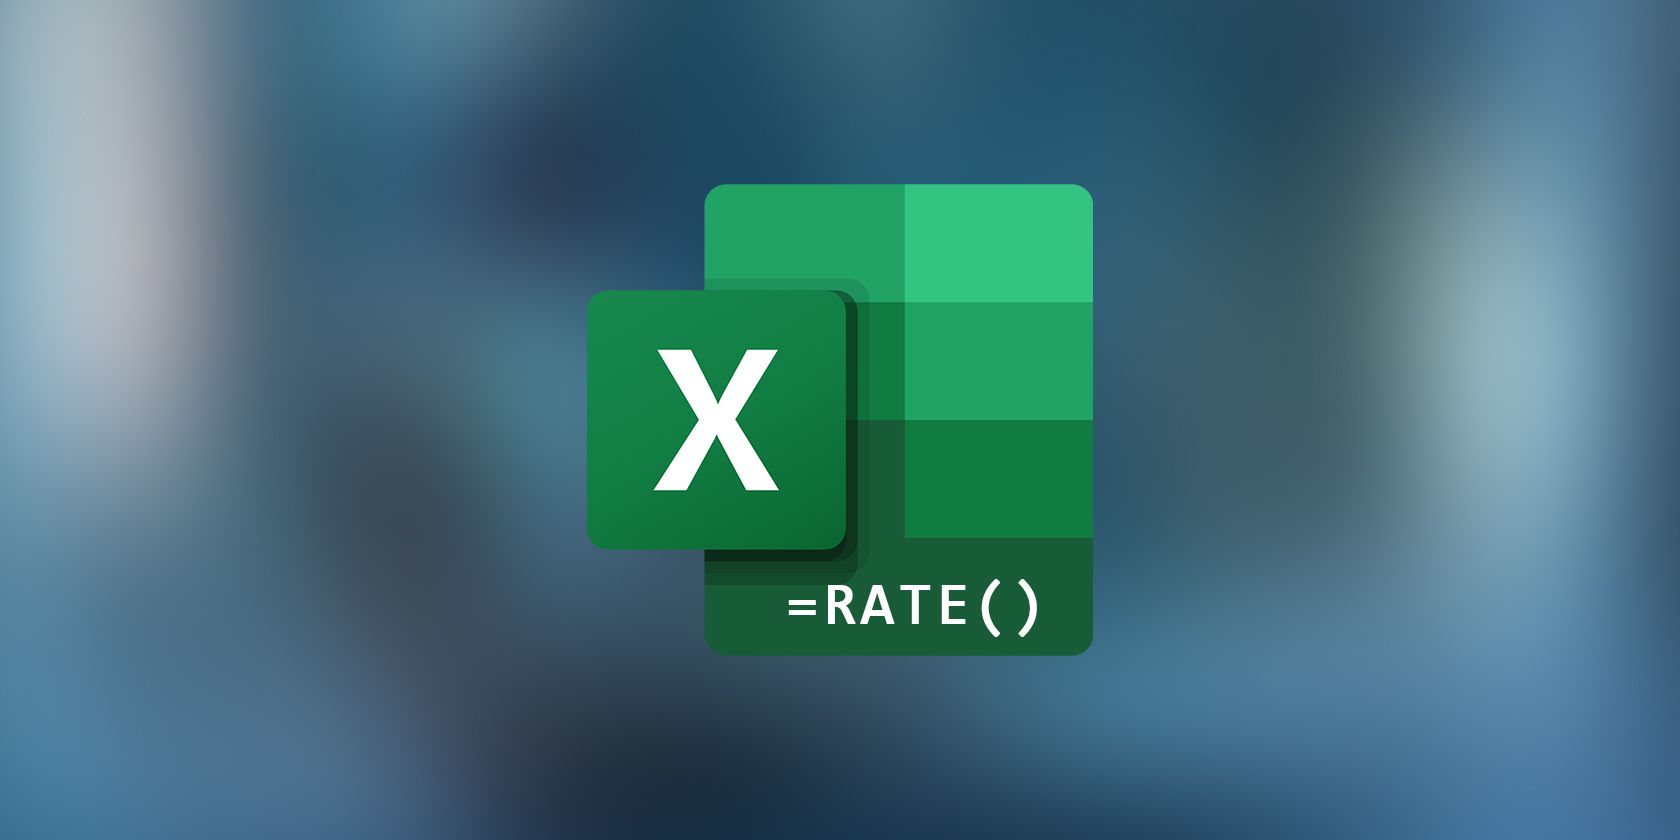 Excel logo with RATE underneath it